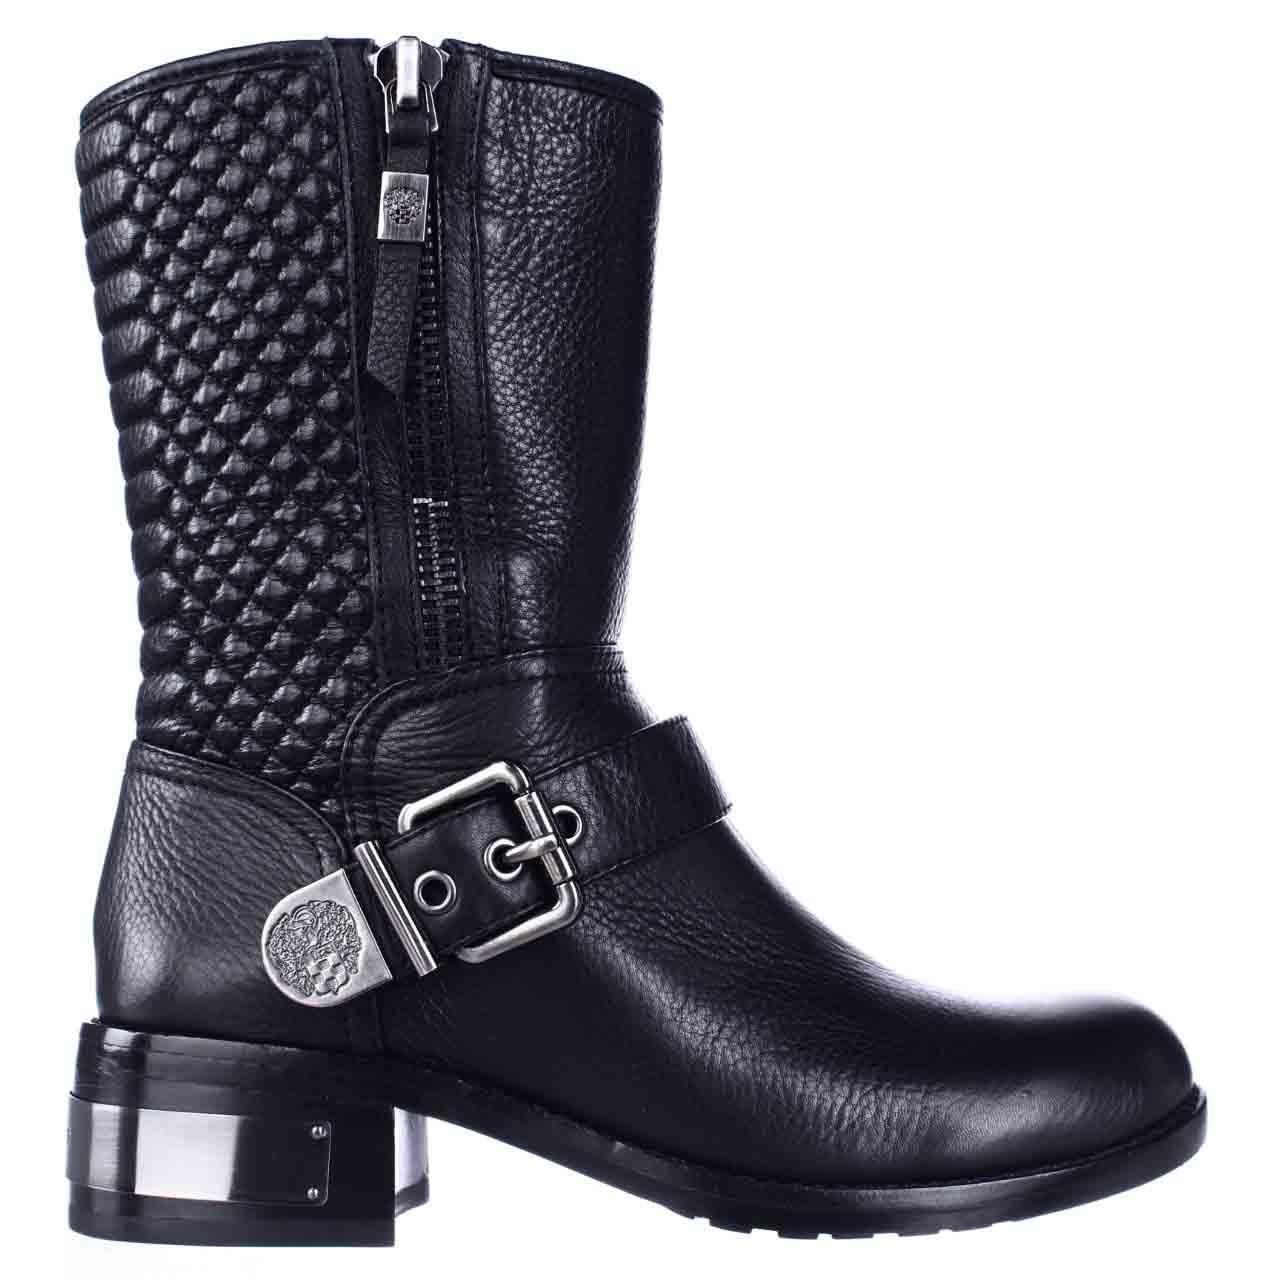 Vince camuto Whynn Midcalf Motorcycle Boots in Black Lyst